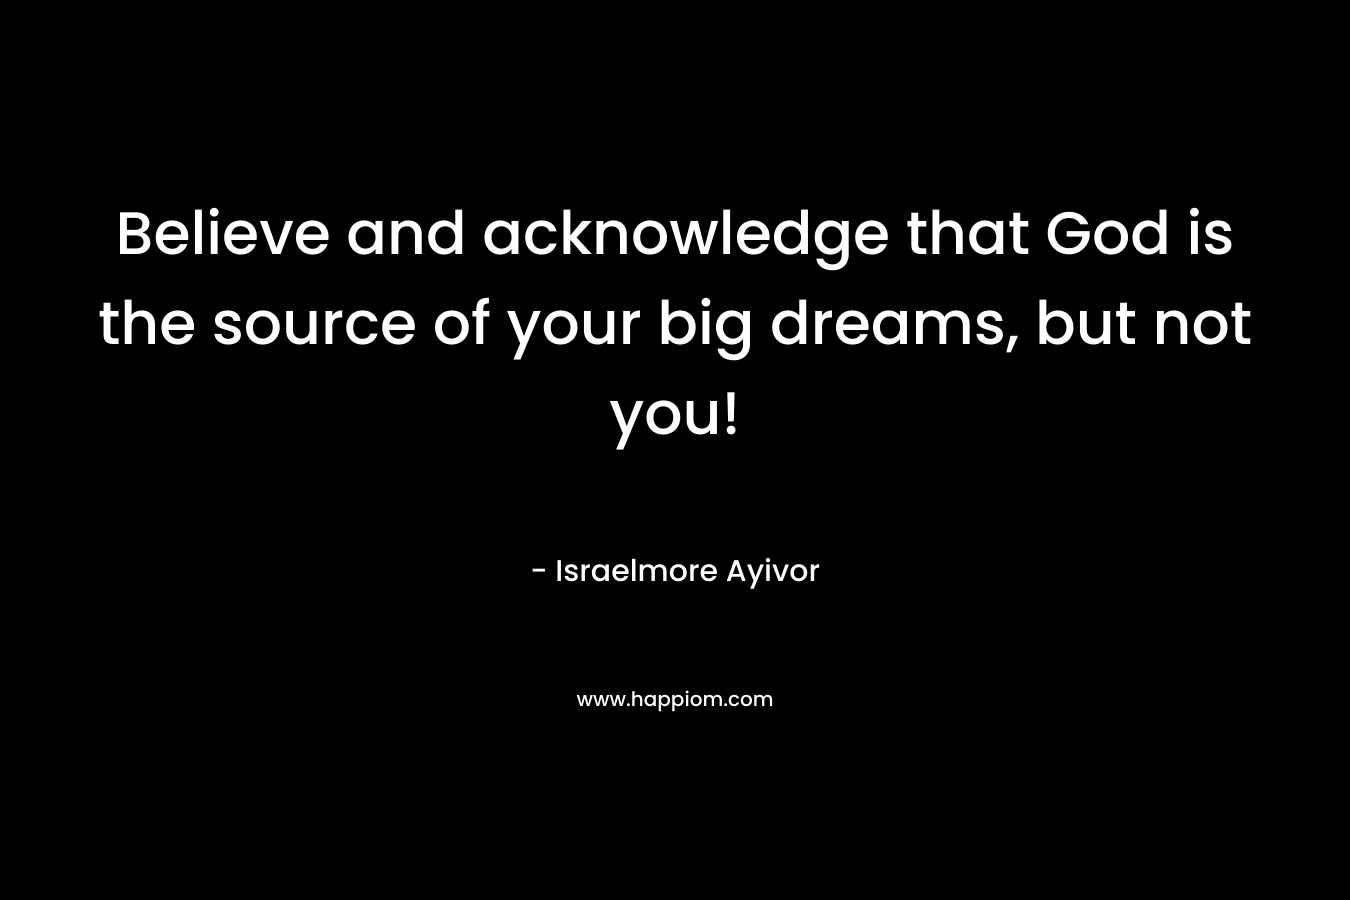 Believe and acknowledge that God is the source of your big dreams, but not you!